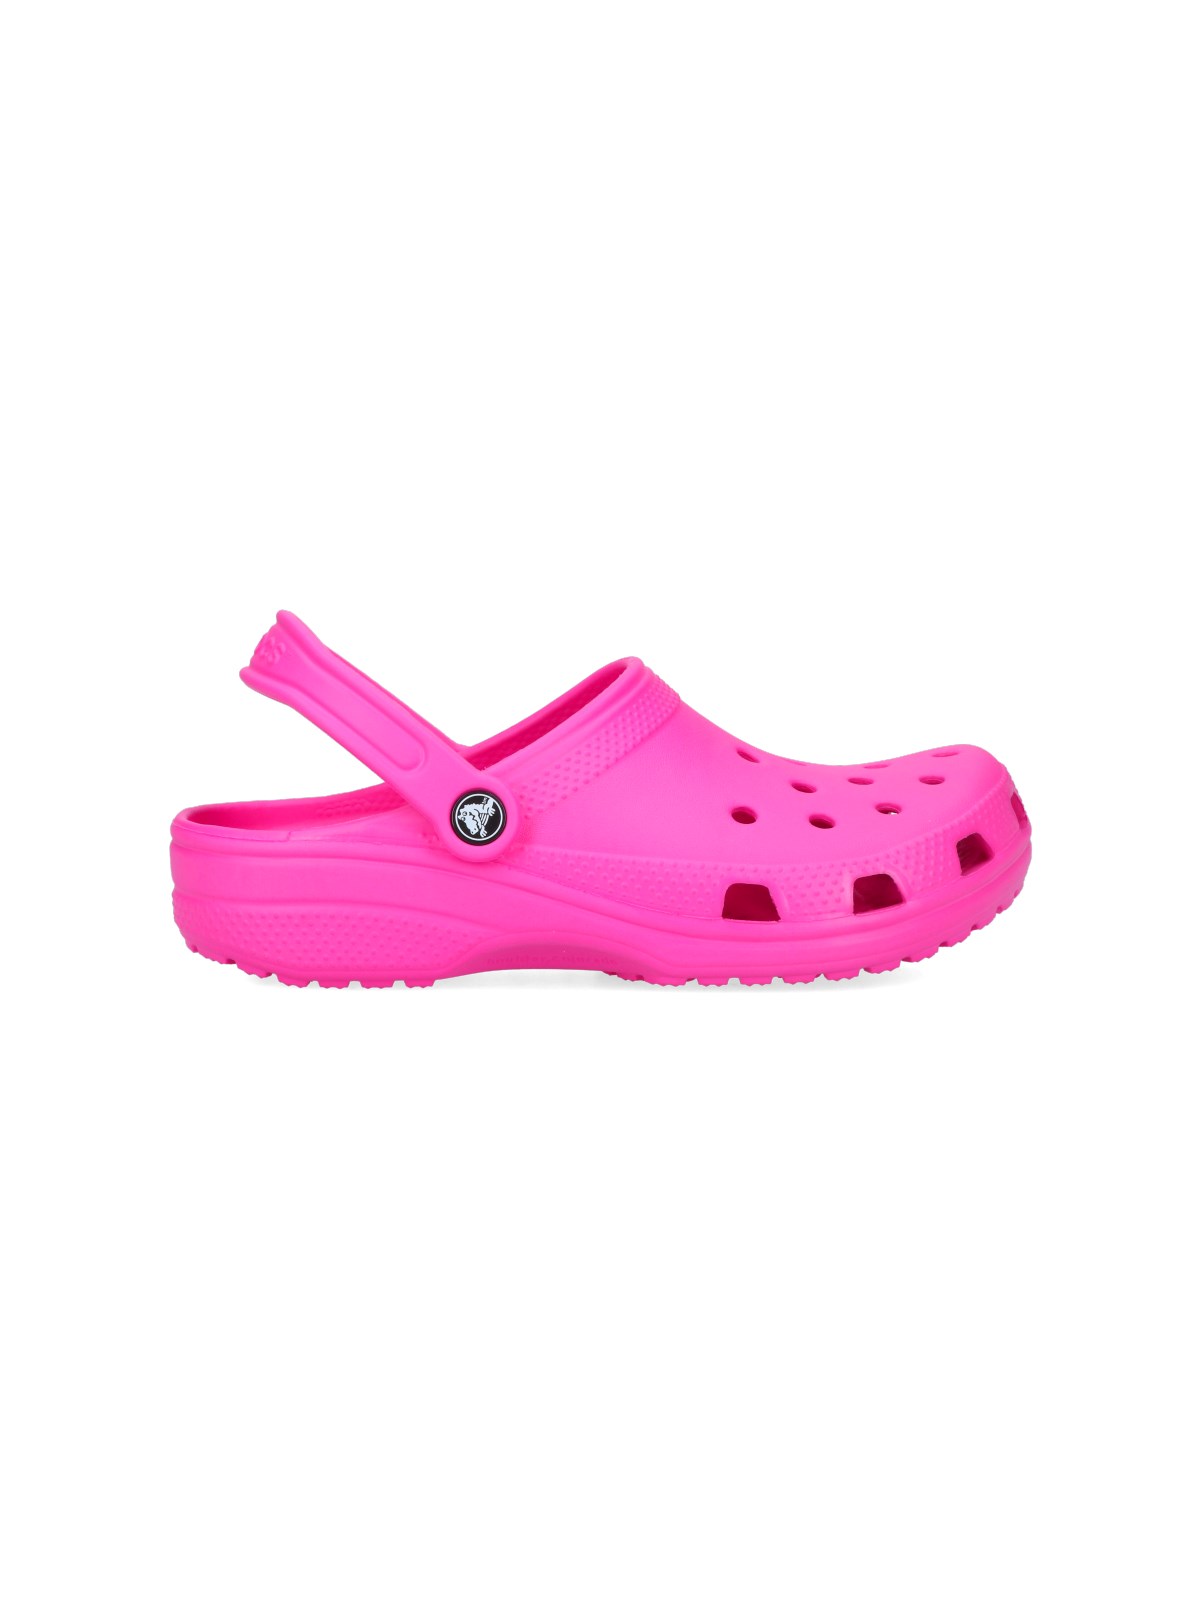 Crocs Flat Shoes In Pink